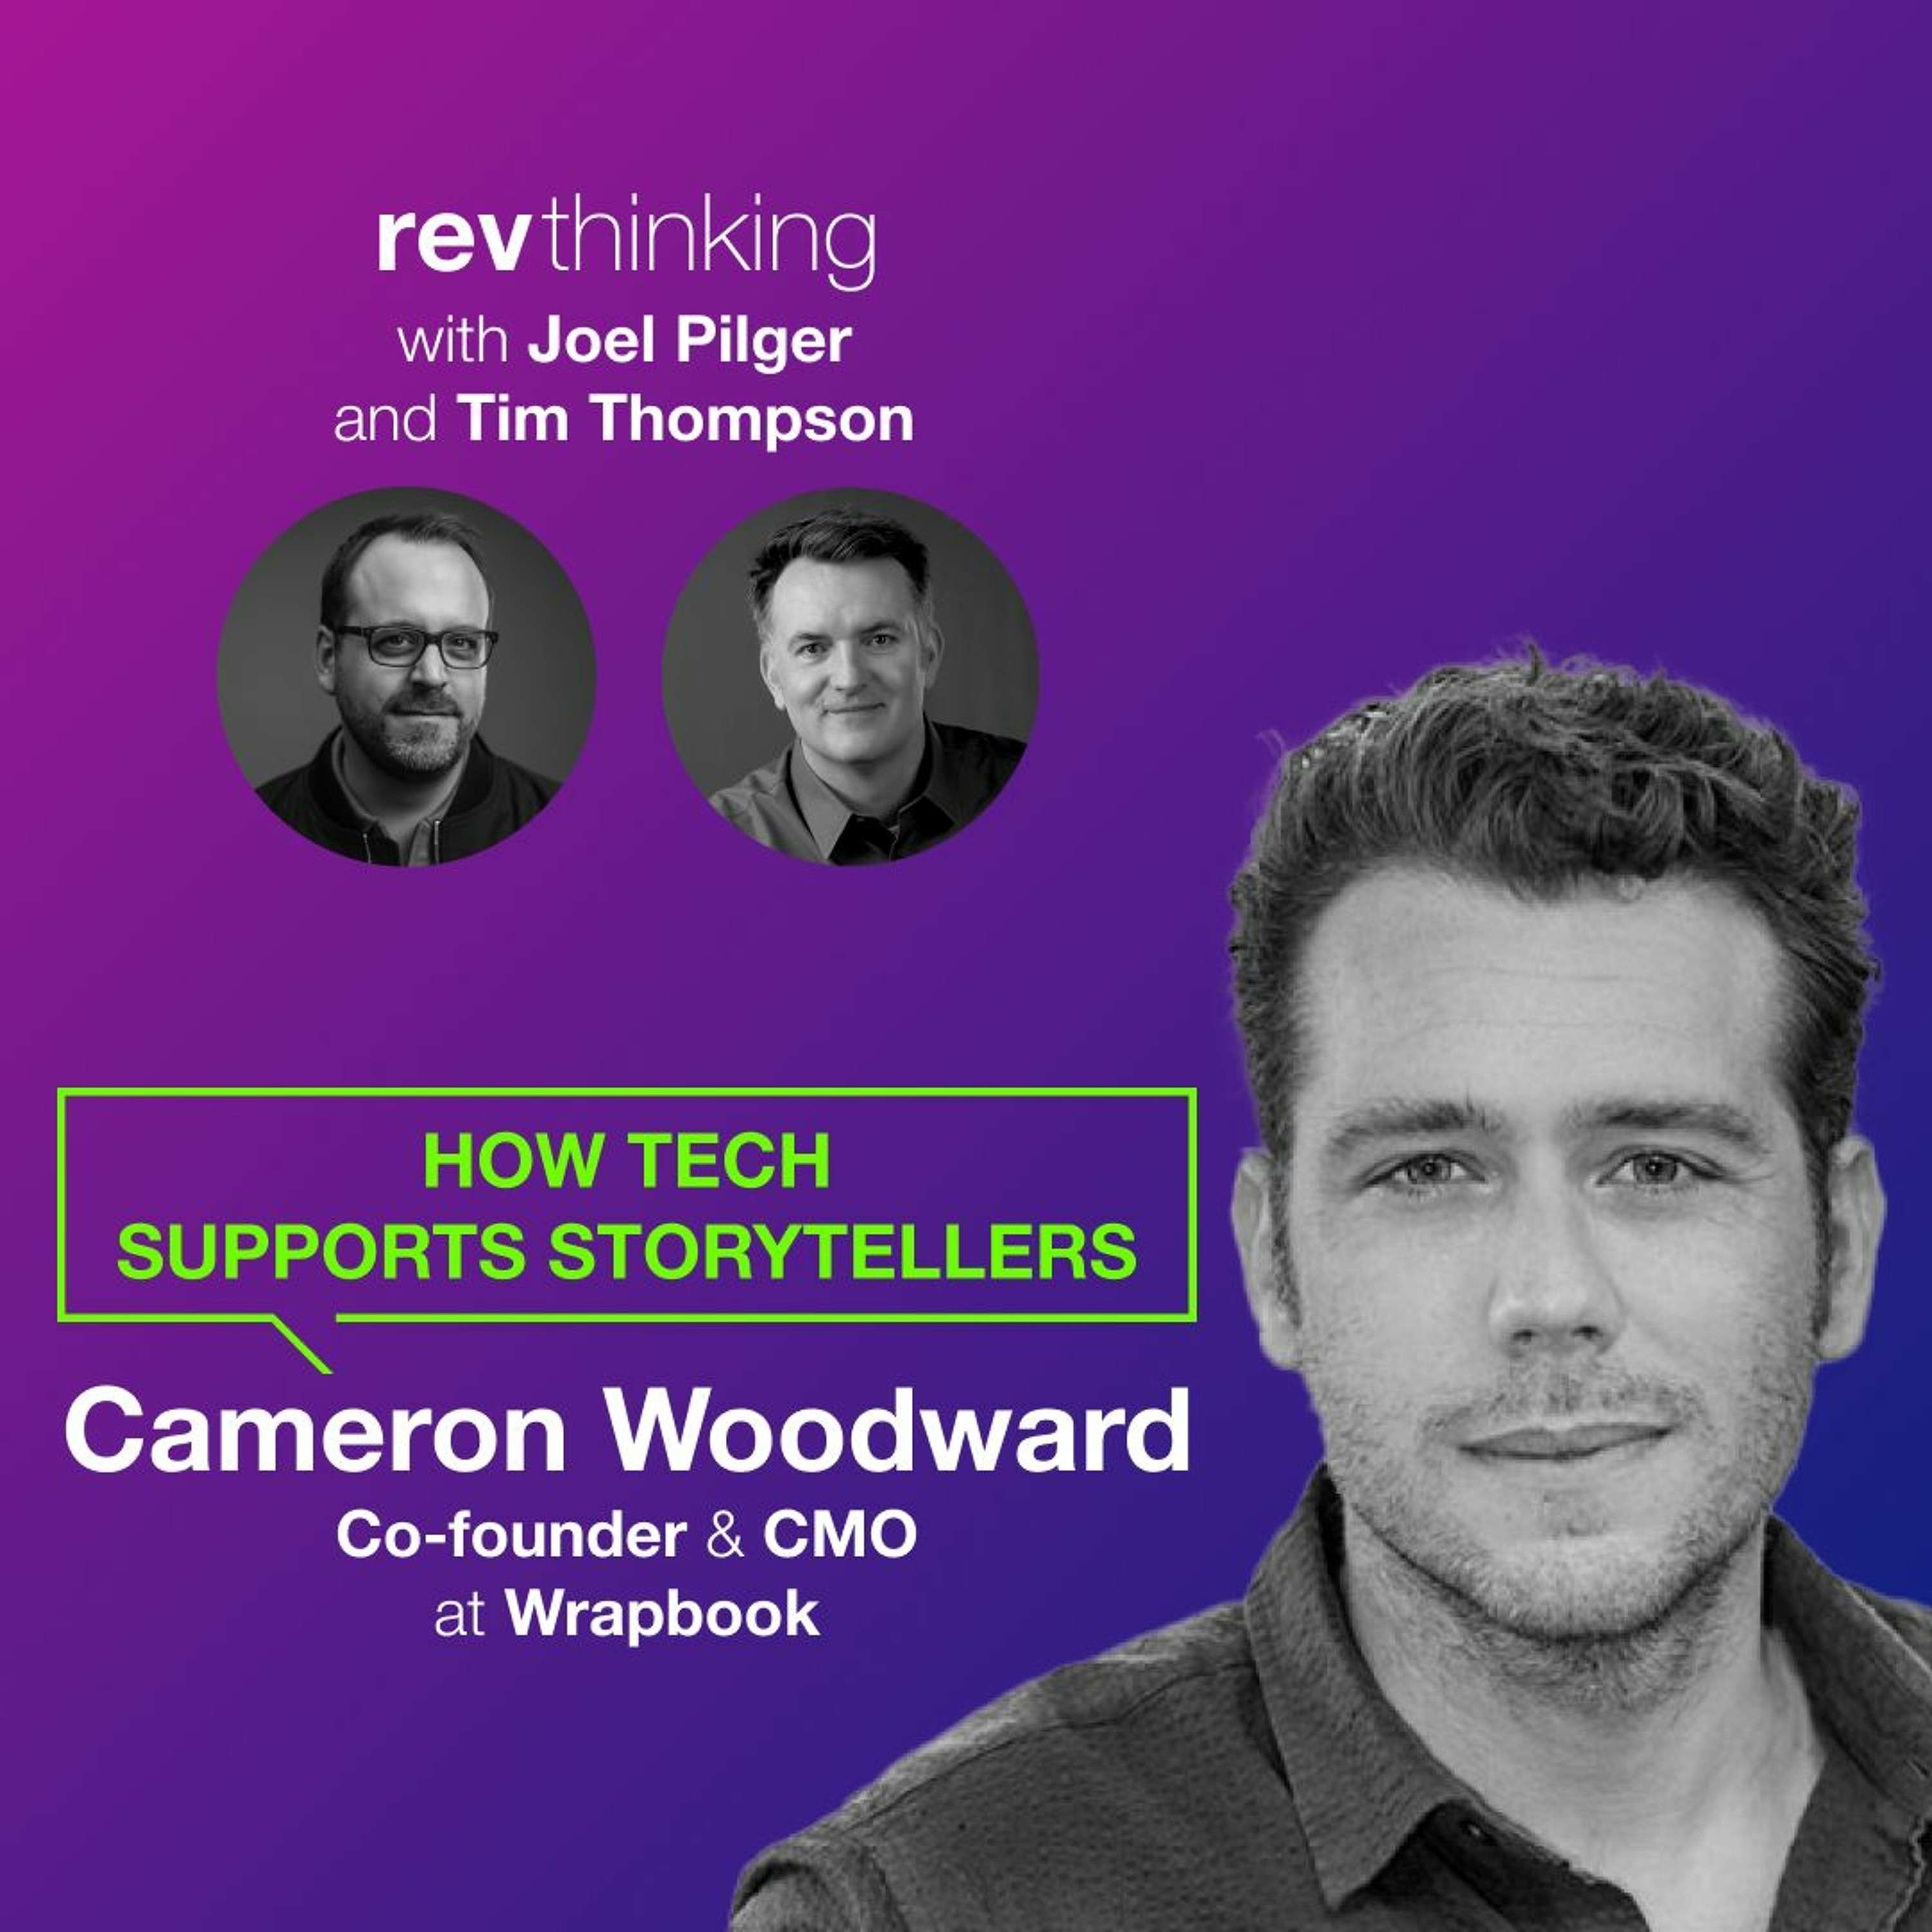 How Tech Supports Storytellers with Cameron Woodward at Wrapbook